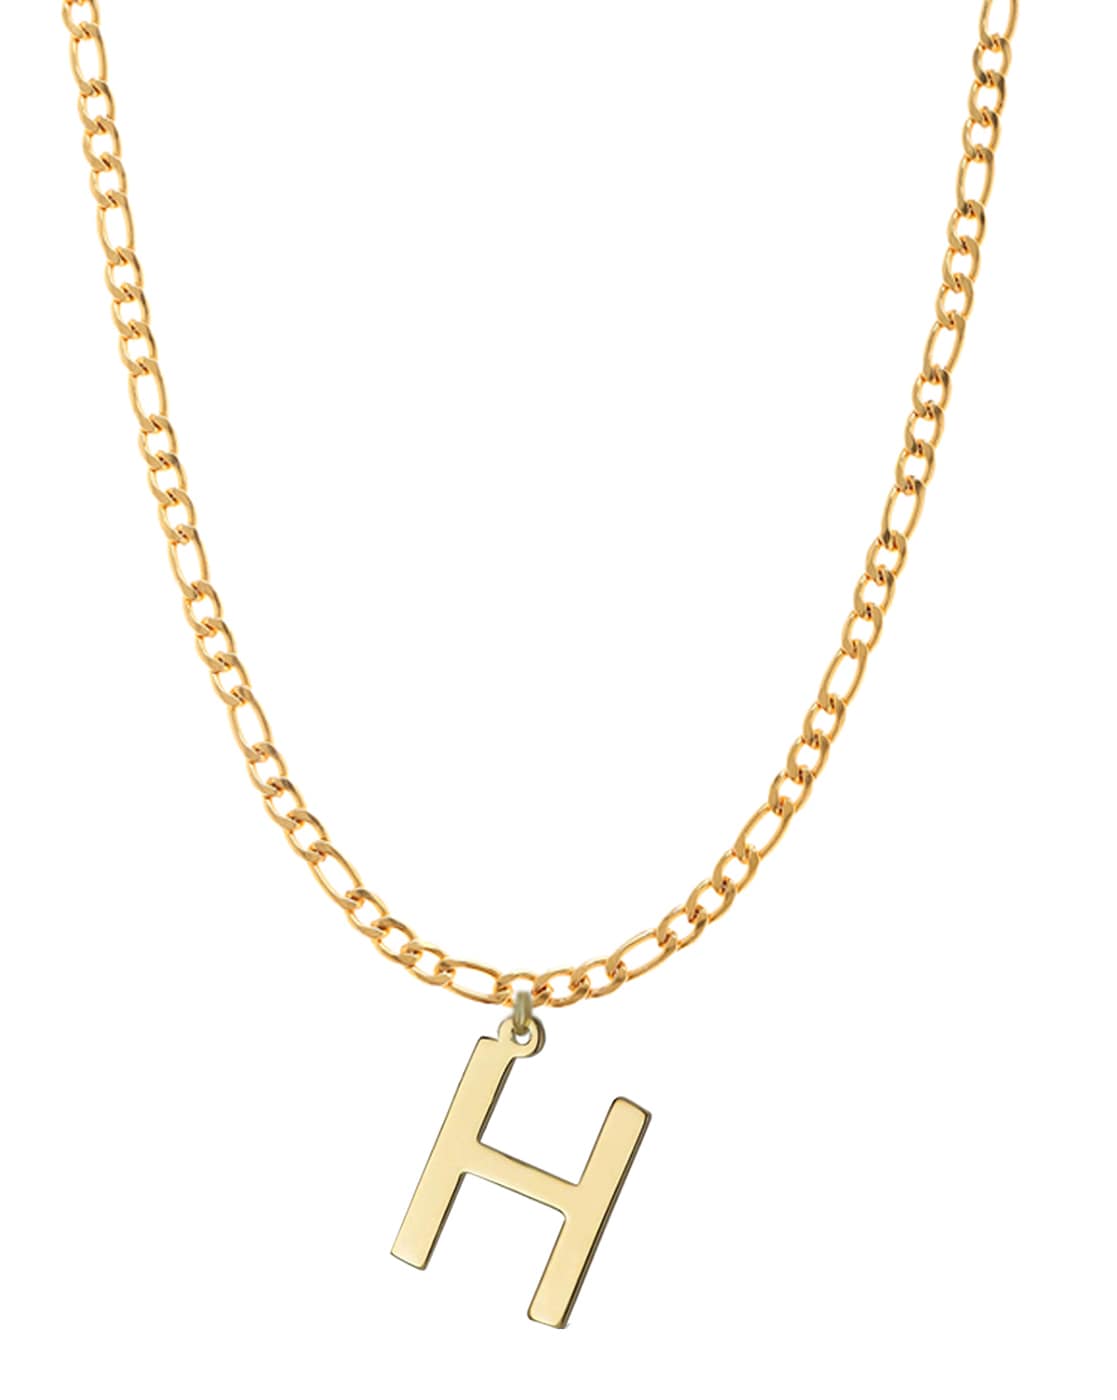 Diamond Letter H Necklace in 10k Gold | Medley Jewellery